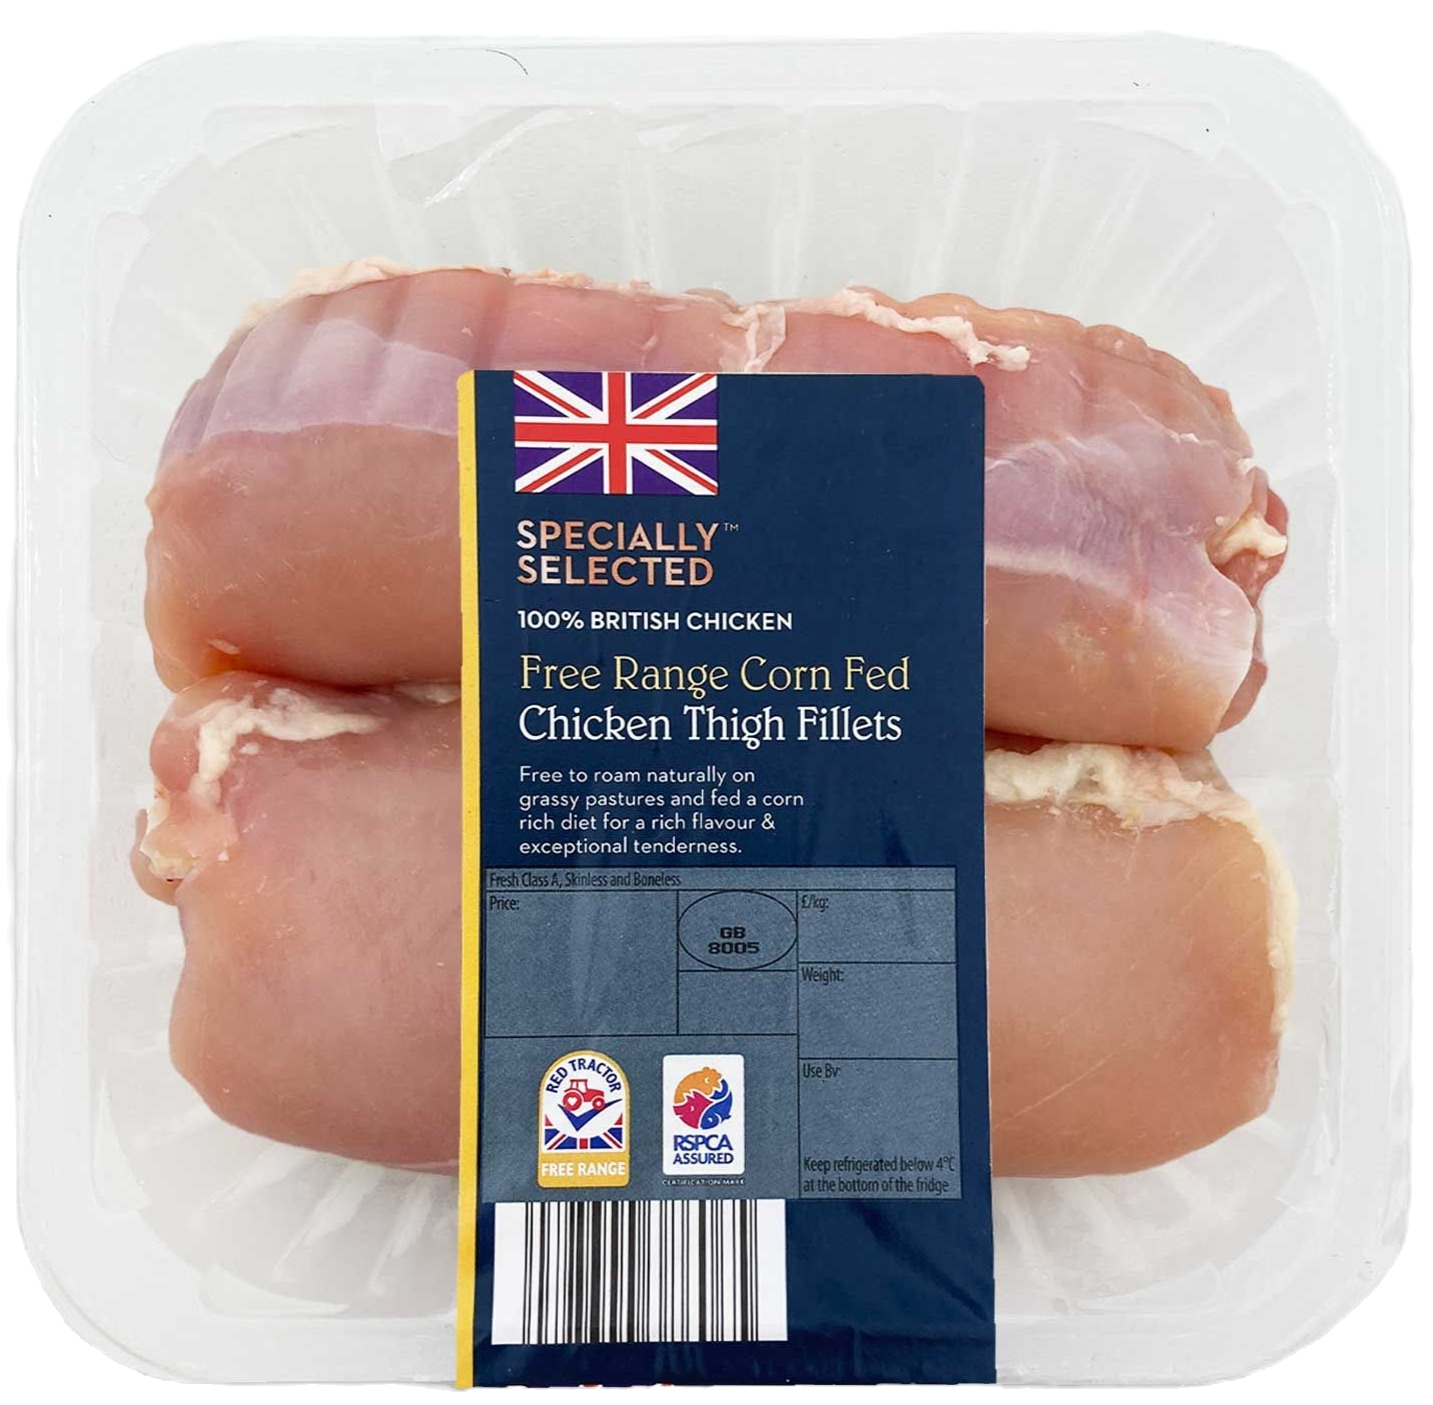 Specially Selected Free Range Corn Fed Chicken Thigh Fillets 375g